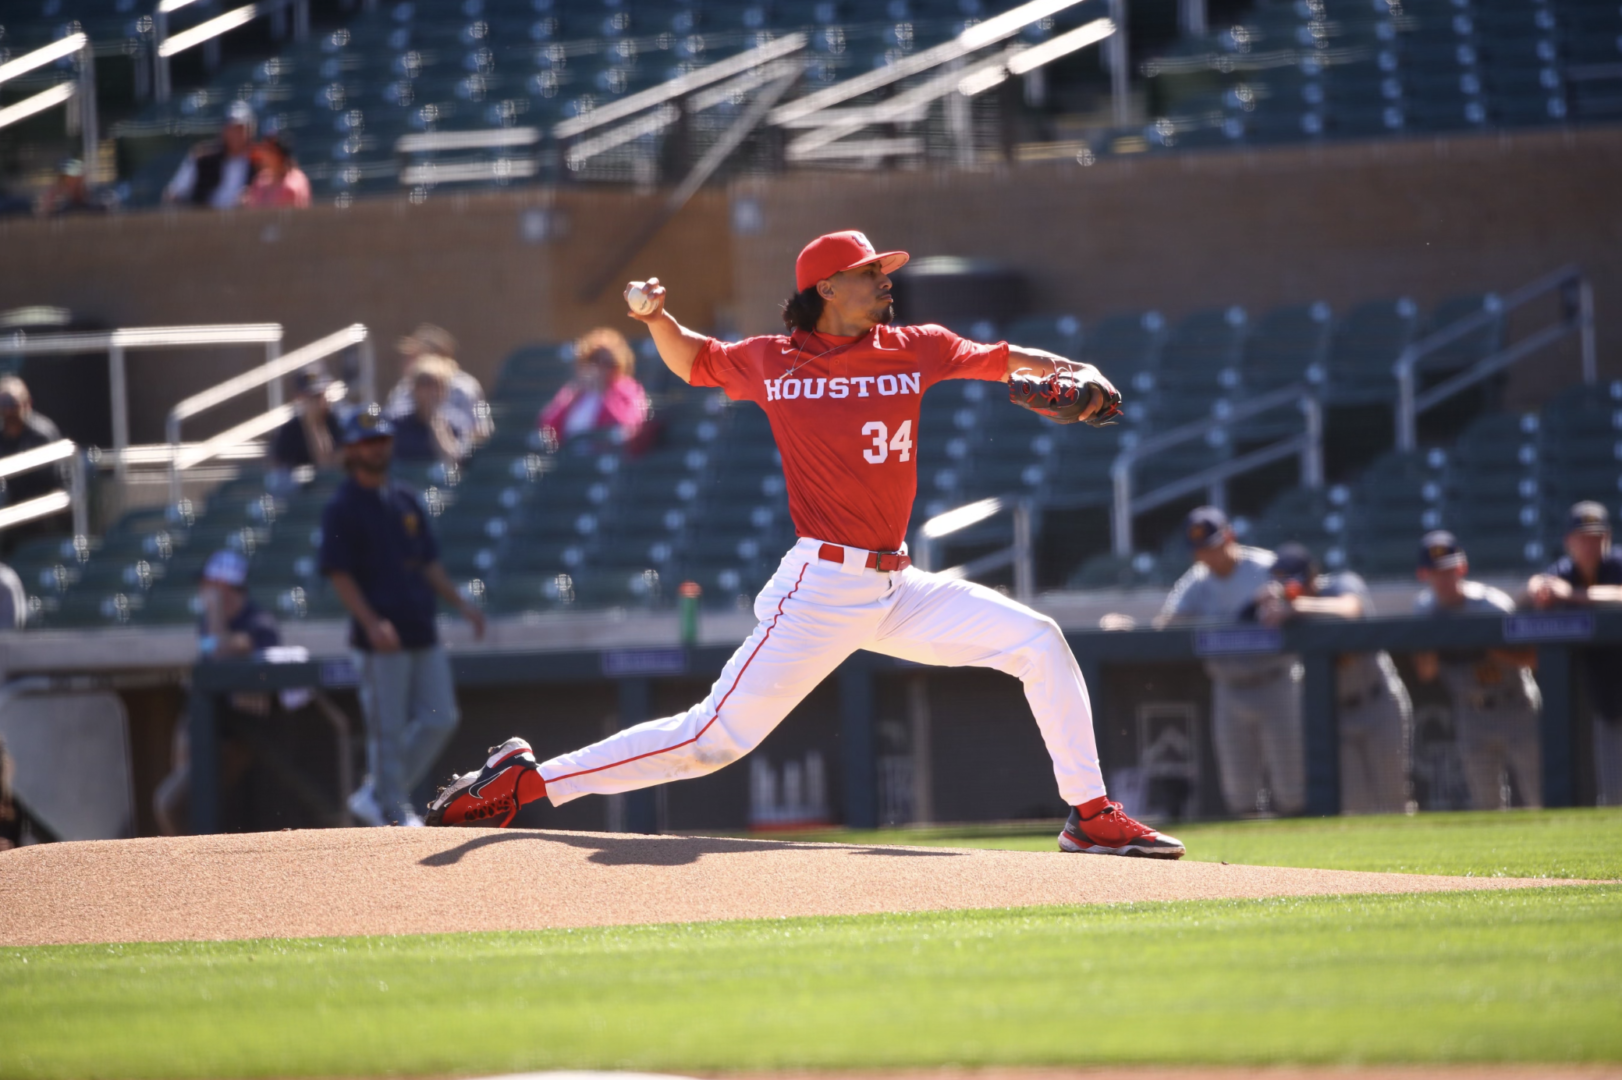 Quiet bats lead to 03 start for UH baseball in the MLB4 Tournament